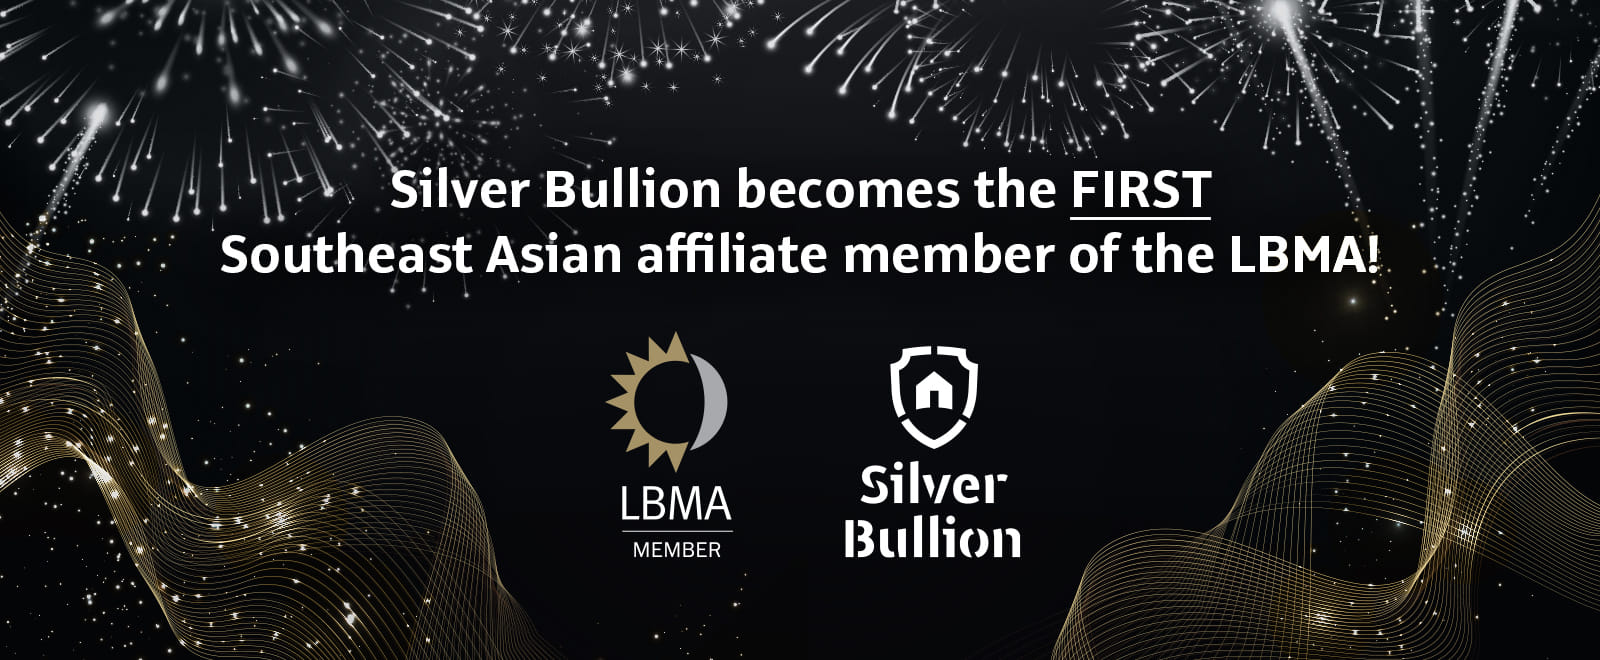 Silver Bullion becomes the first Southeast Asian affiliate member of the London Bullion Marketing Association (LBMA)